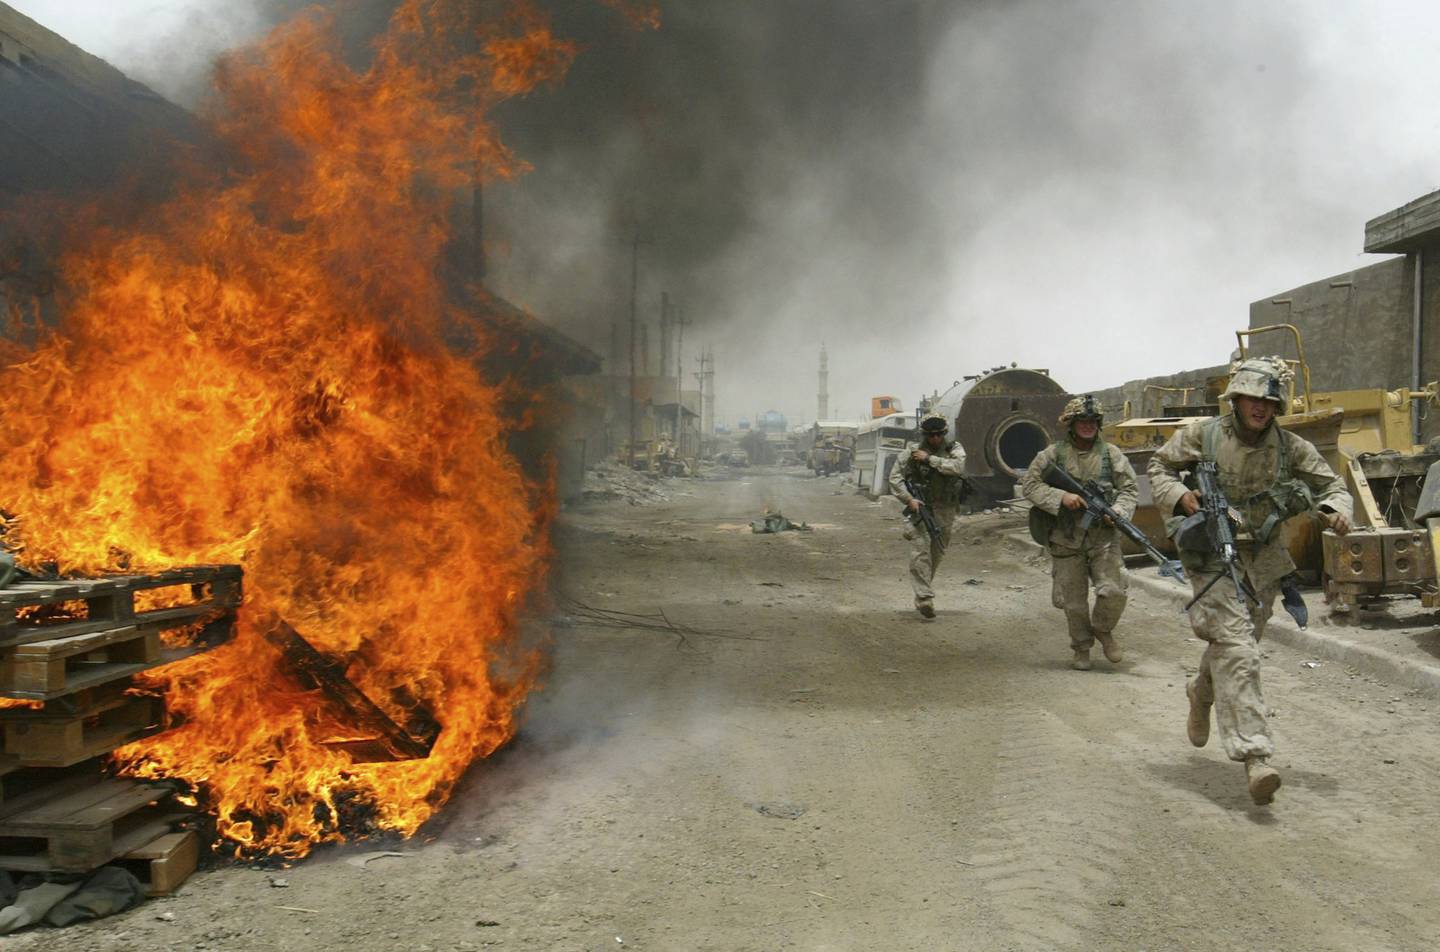 US Marines burn their fortifications on frontline positions in Fallujah, Iraq, before pulling out of the city, in 2004. AP Photo